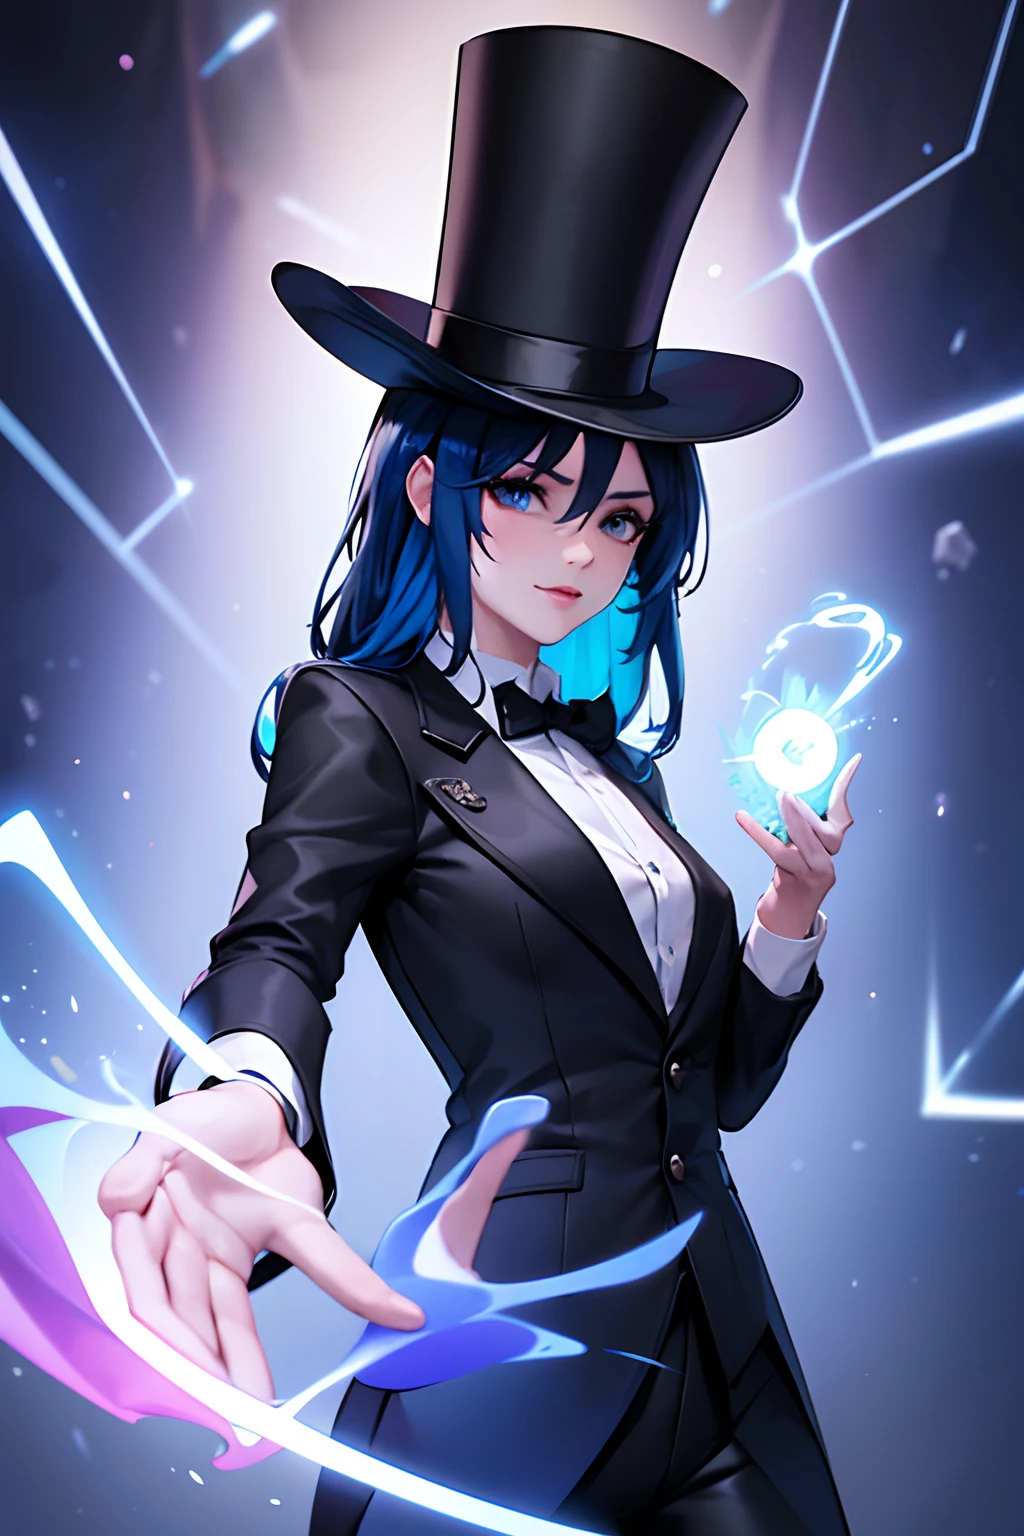 Girl, with daek blue hair, wearing black top hat, Top Hat, wearing blazer, Wizard Costume, black leggings, 4k, using magic in her hands, Looking at the Viewer, in a magic show setting, 4k, magical landscape, play master